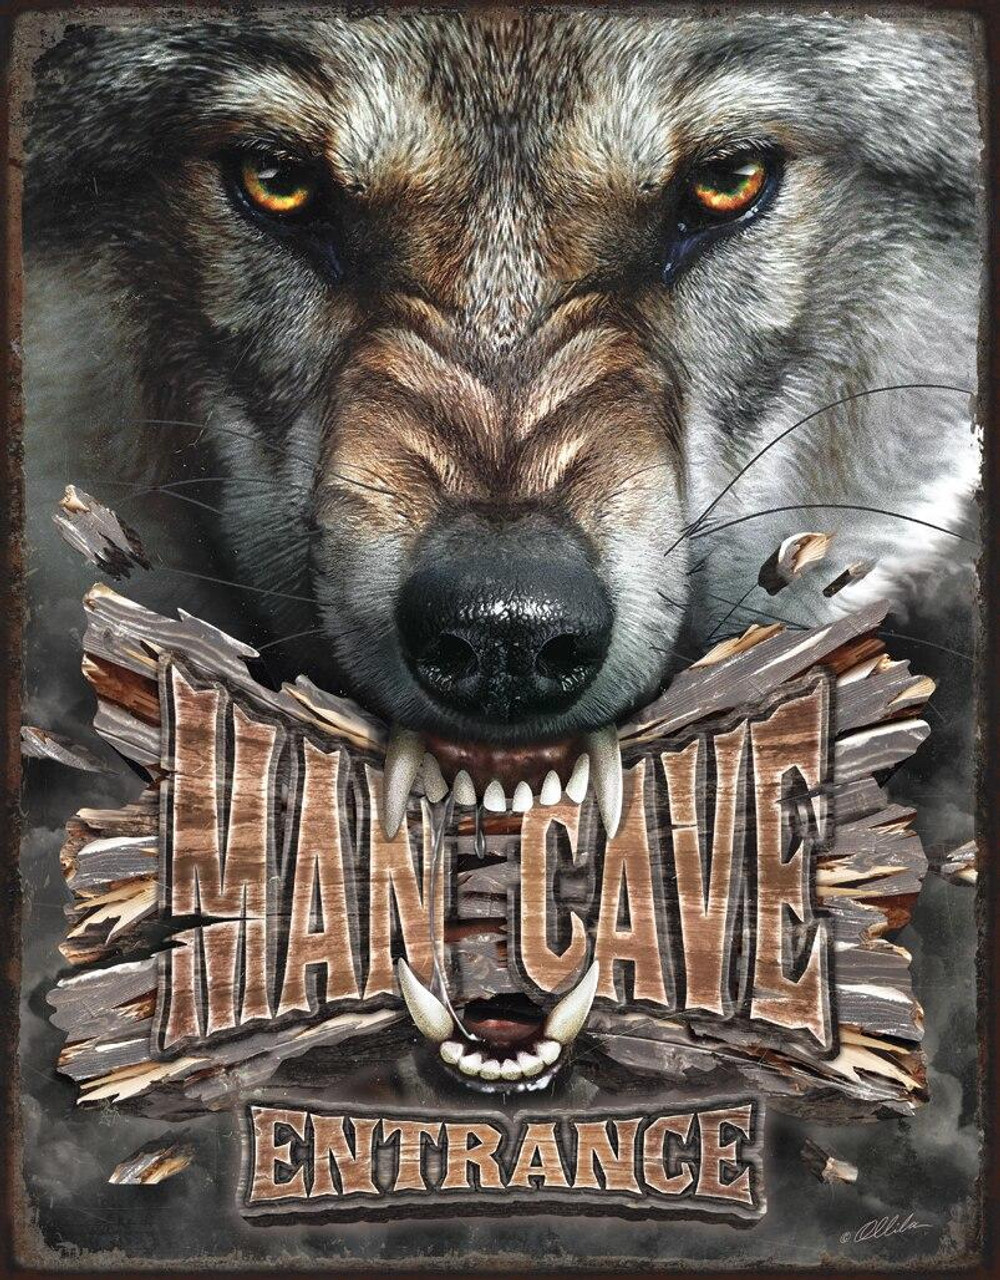 Man Cave Wolf
Brand: N/A
Sign Material: Tin sign
Sign Size: 12.5in x 16in - 31.75cm x 40.64cm
Print Layout: Vertical/Portrait
Made In: U.S.A

Proudly & Always Will be AMERICAN Made!